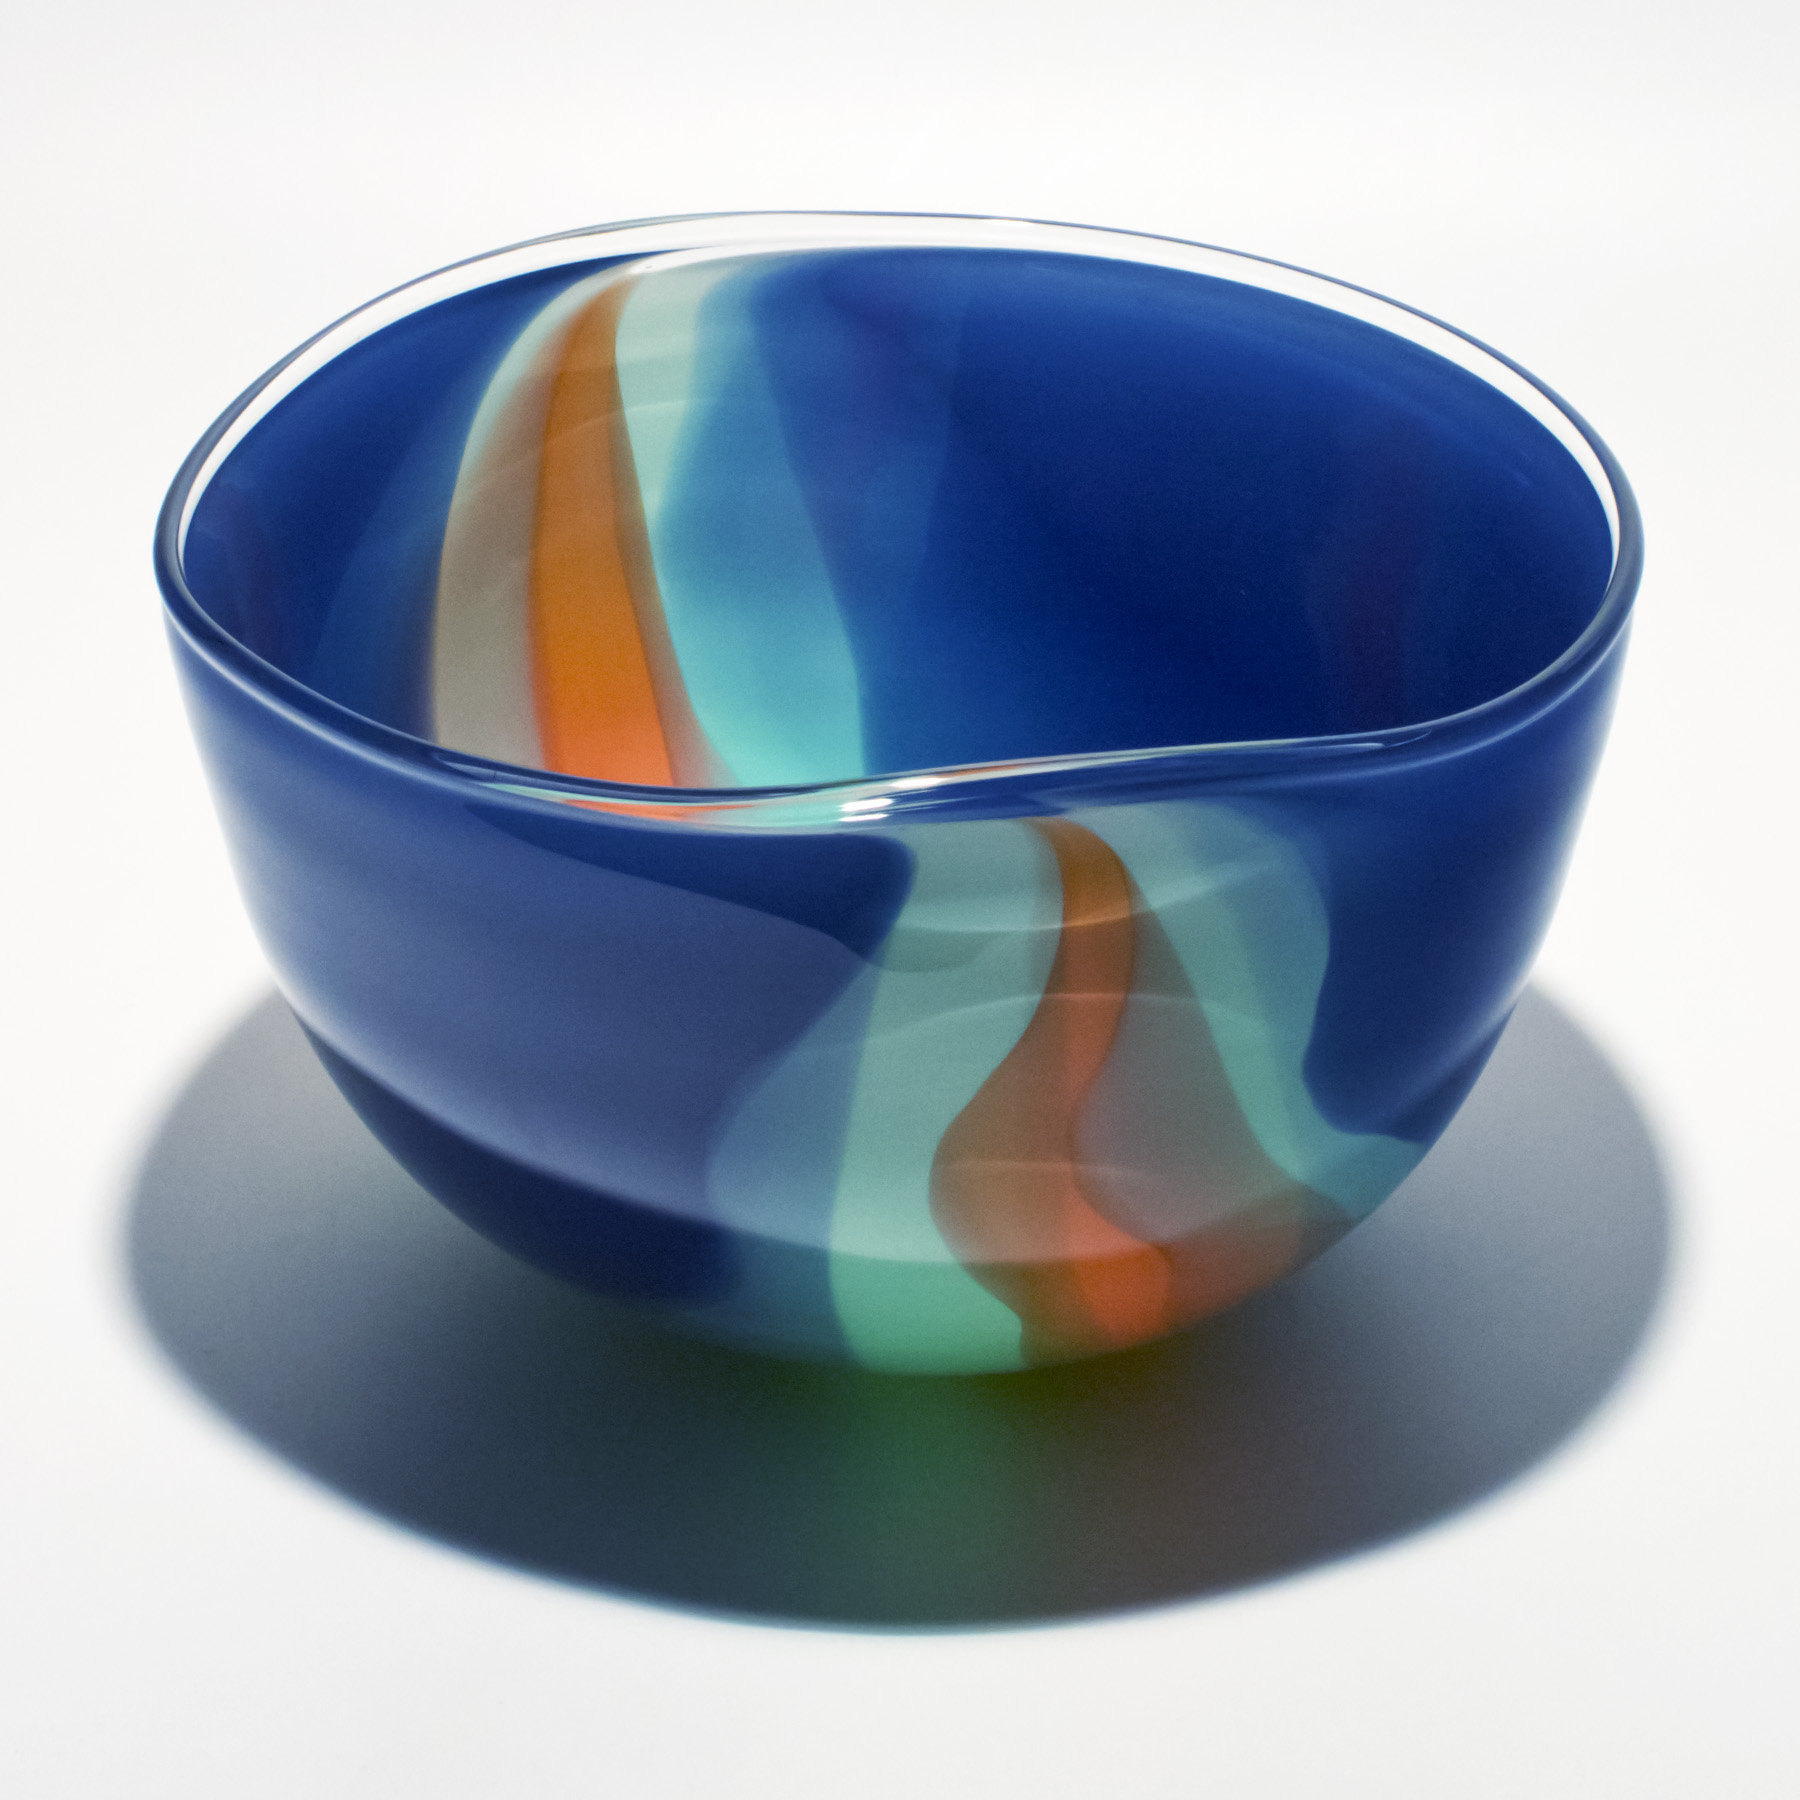 Opaque Ribbon Bowl In Steel Celedon And Salmon By Michael Trimpol And Monique Lajeunesse Art